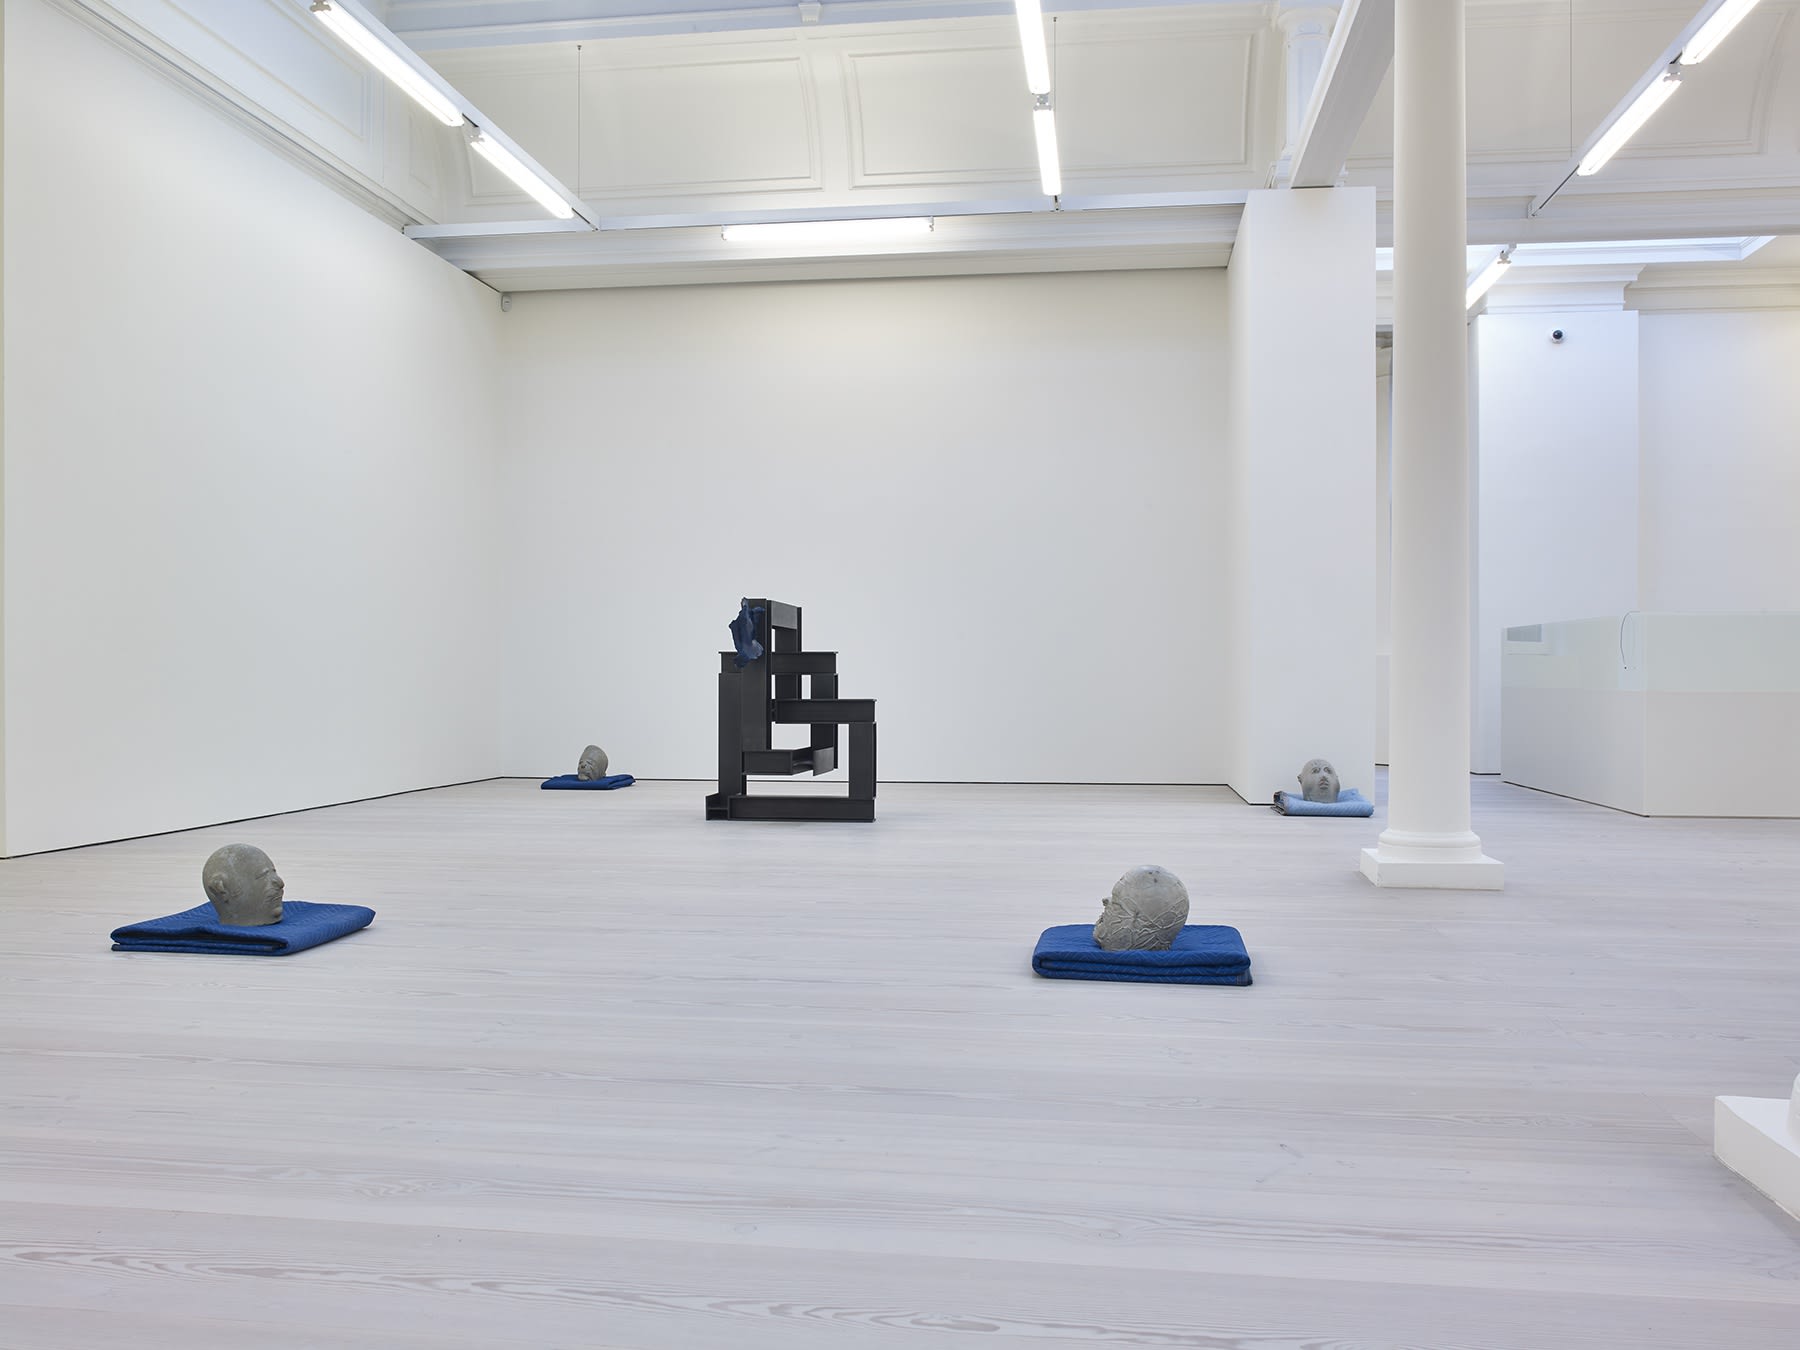 Gallery view, abstract clay heads rest on blue blankets, there is one geometric black square sculpture.